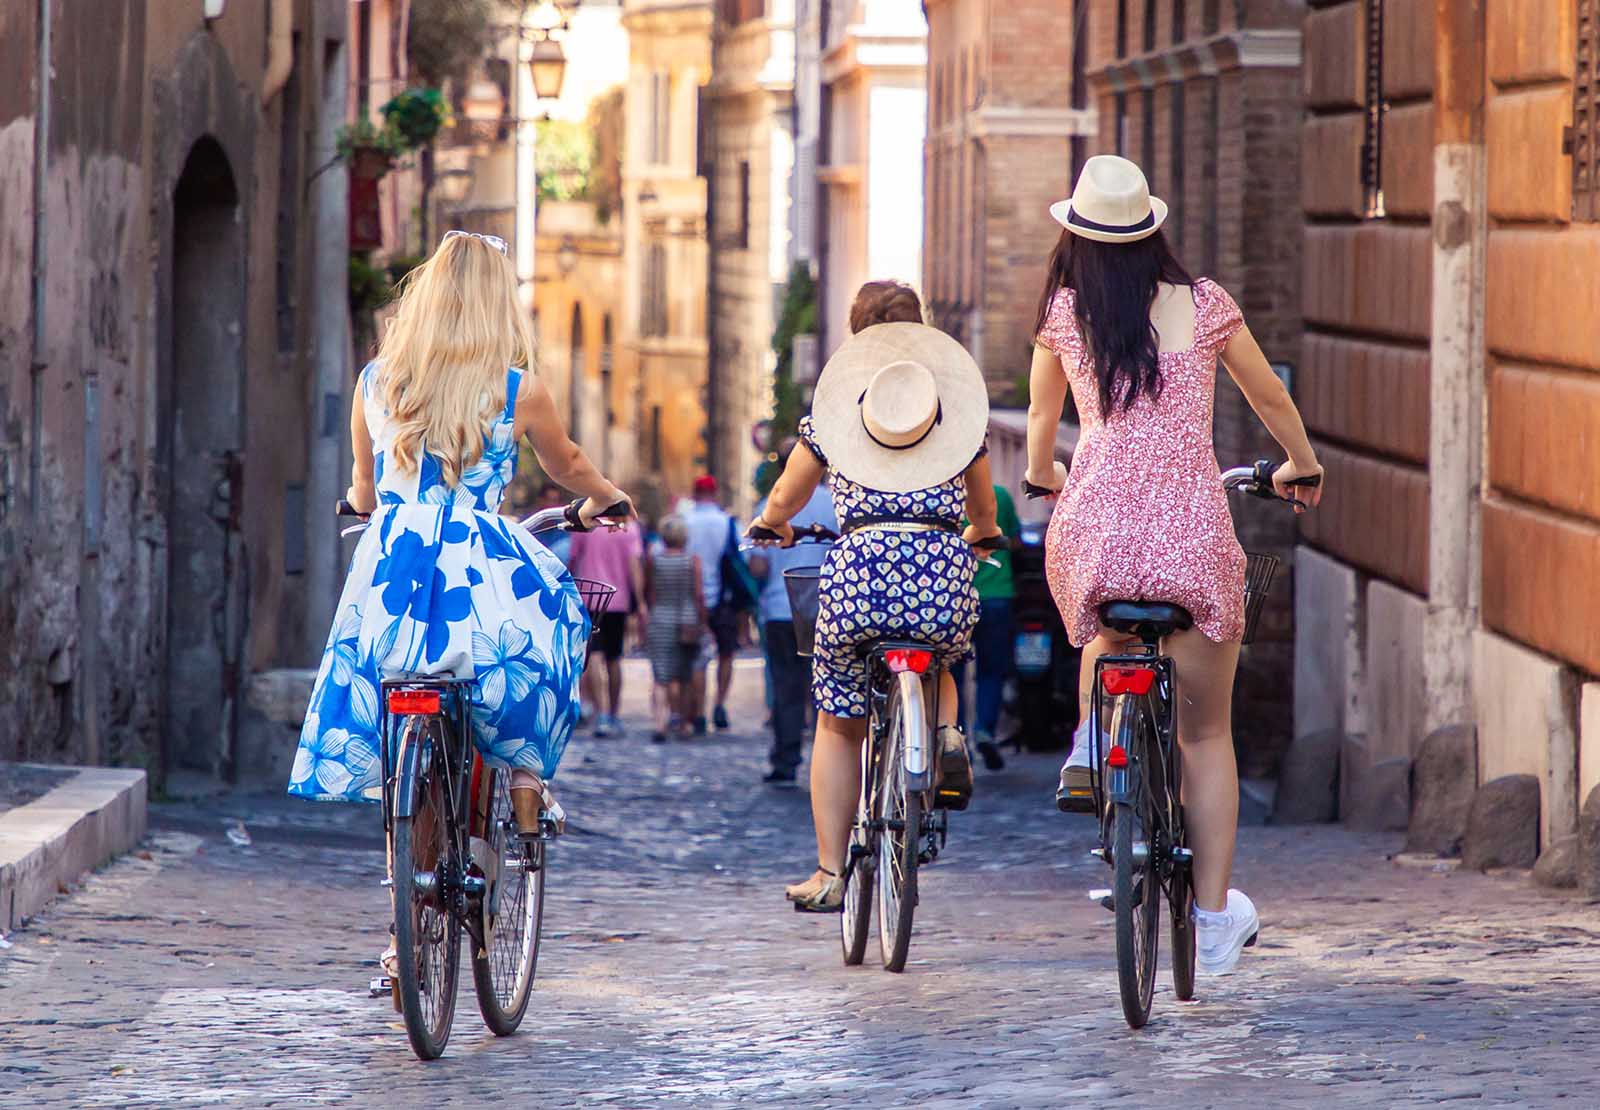 Girls riding bikes through the streets of Rome | Why slow travel is gaining momentum